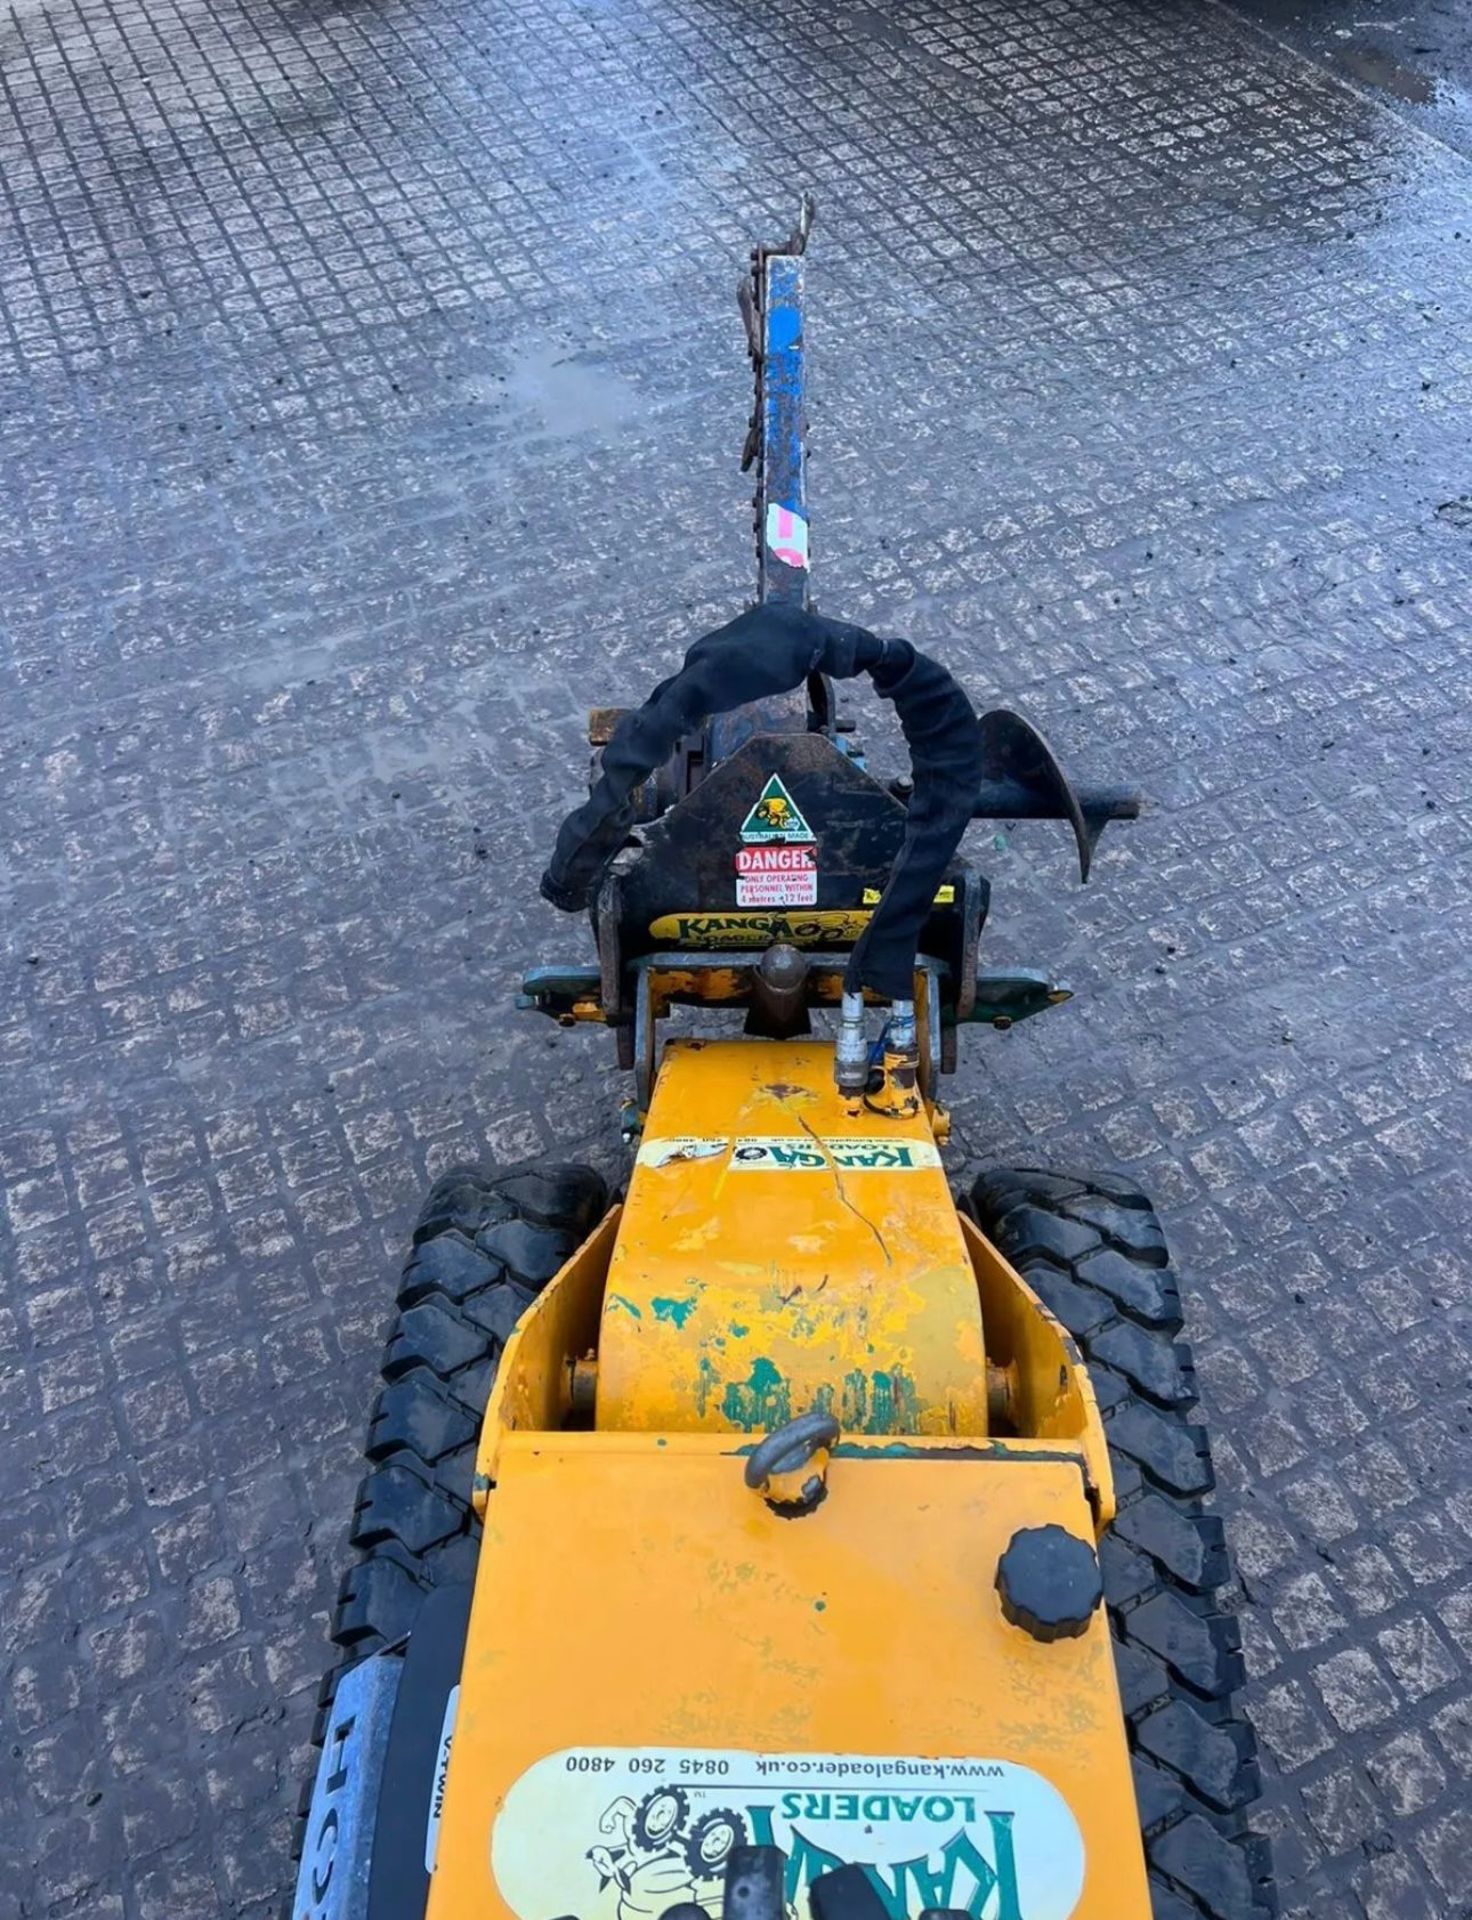 KANGA KID TK216 TRACKED SKIDSTEER WITH TRENCHER ATTACHMENTS *PLUS VAT* - Image 8 of 9